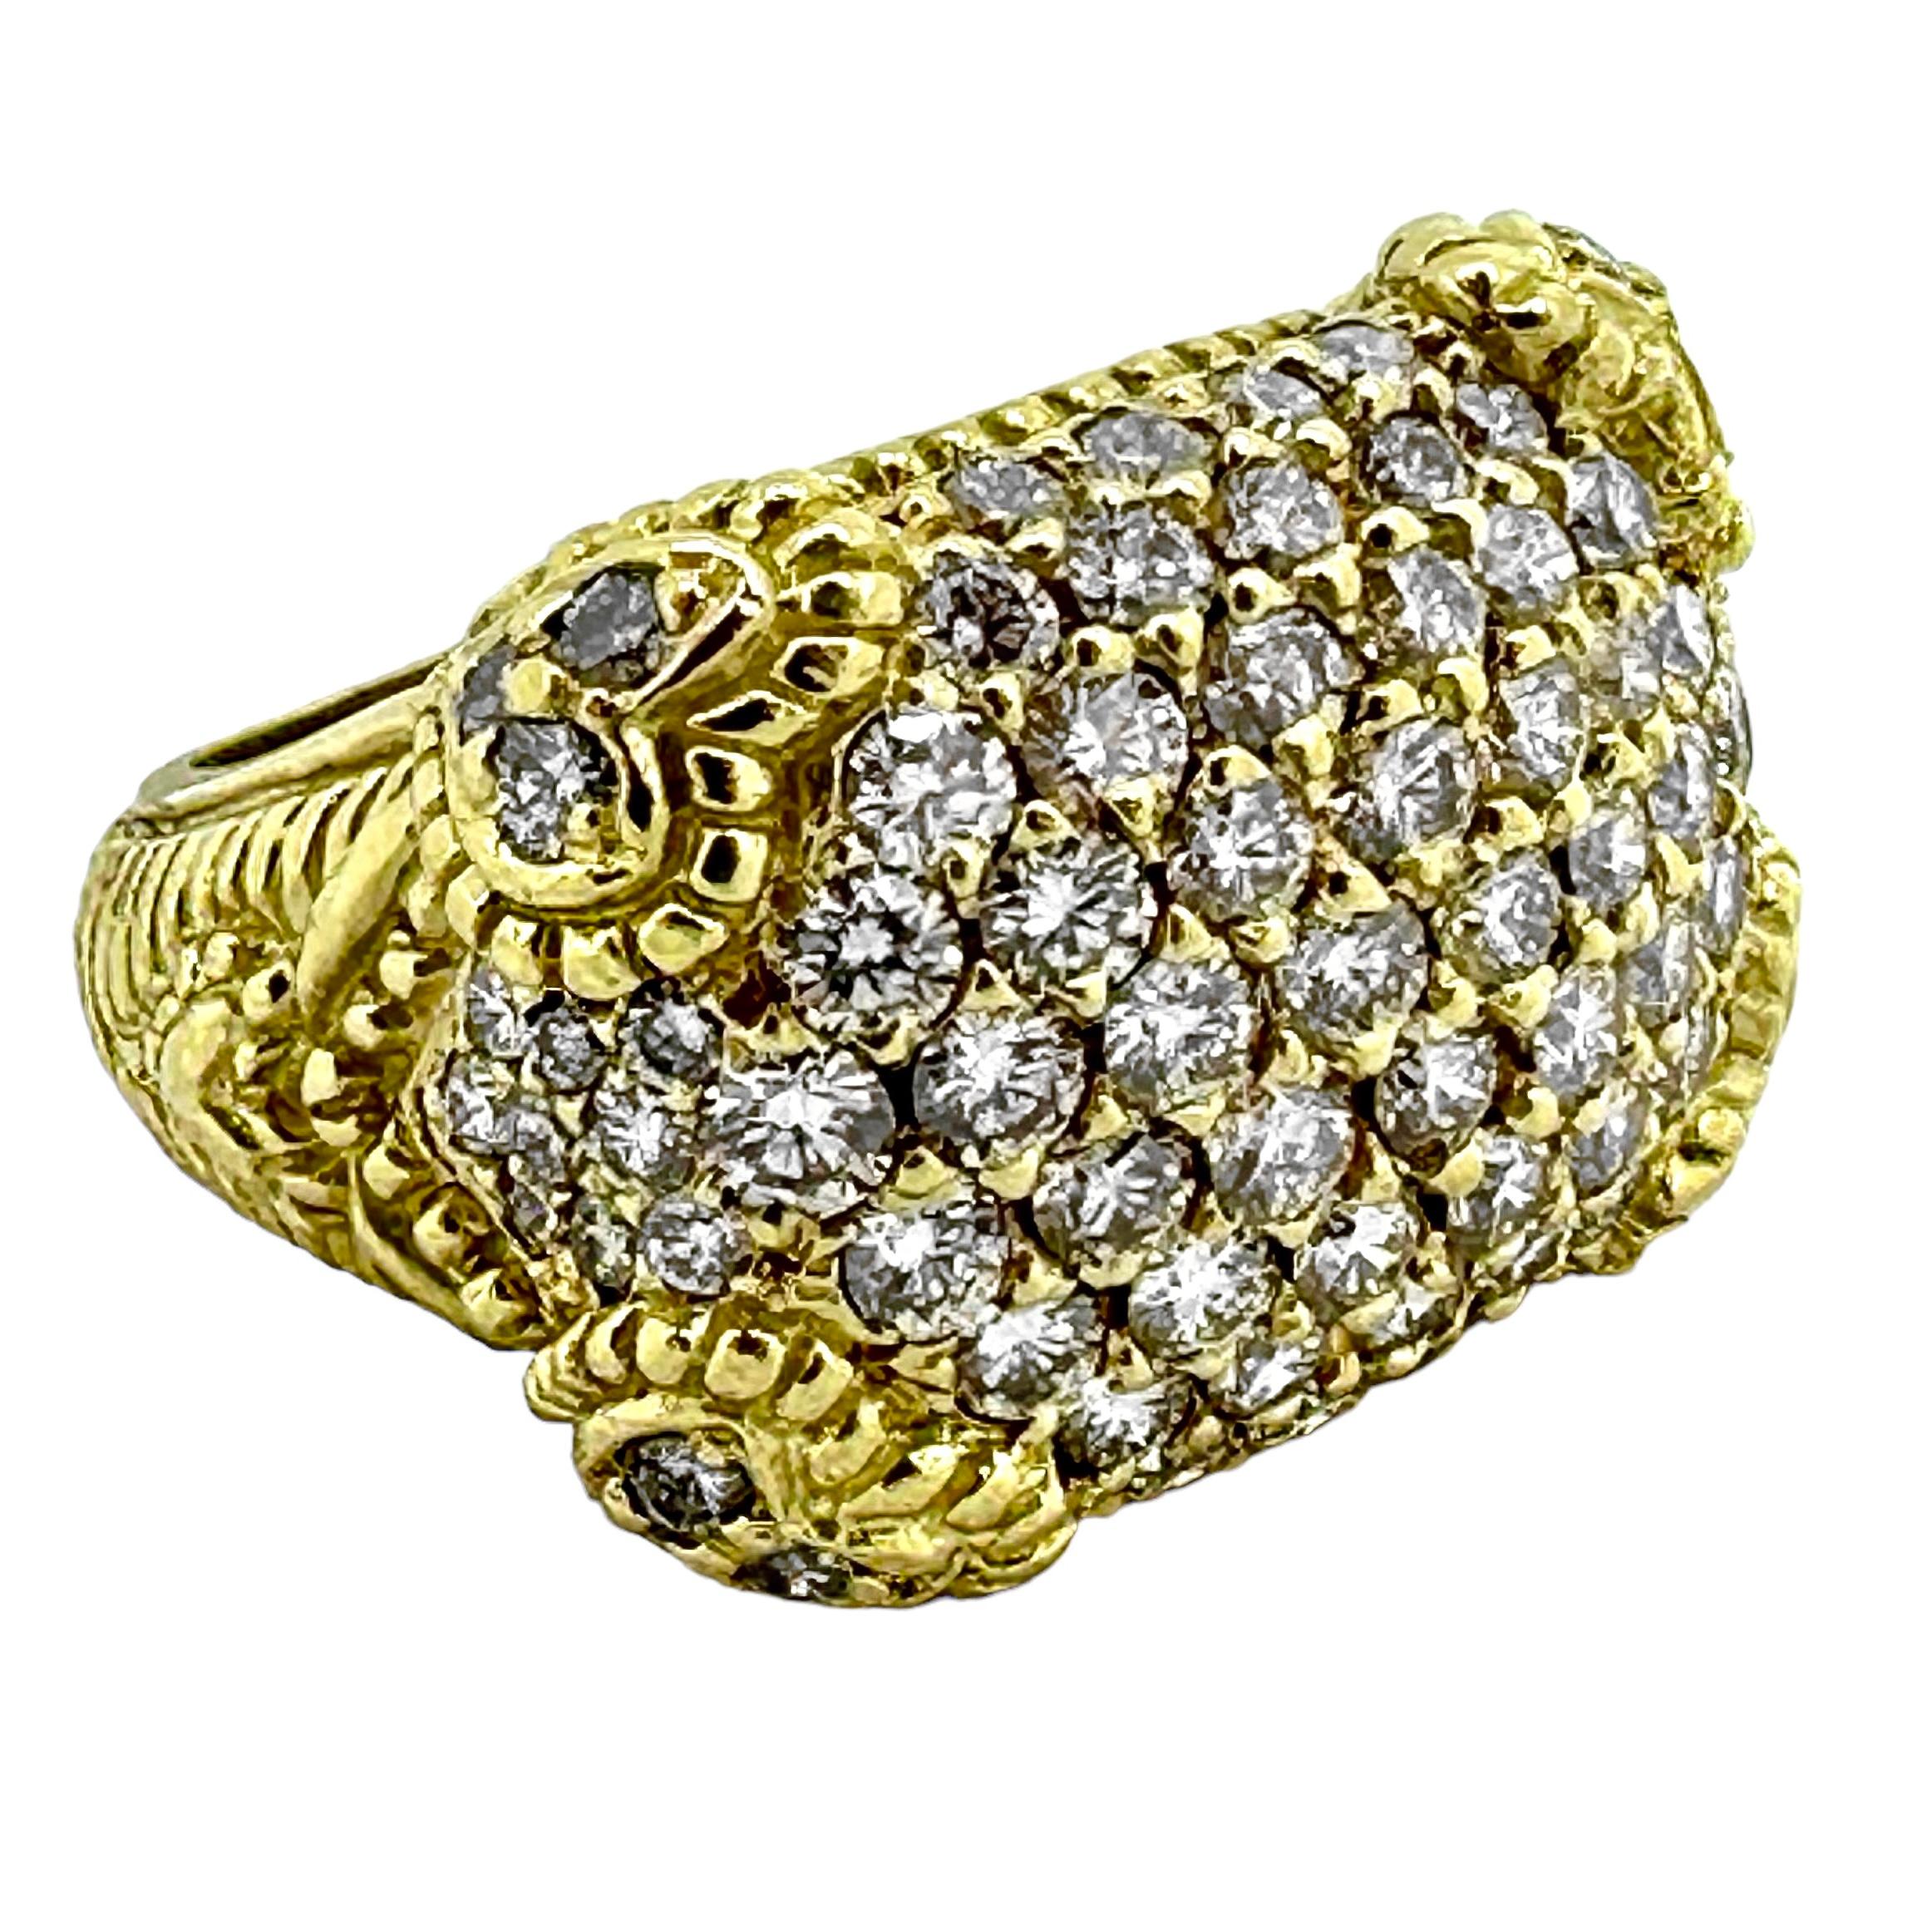 This wonderful late 20th-Century, 18k yellow gold Judith Ripka Classic Revival style cocktail ring truly does dazzle.
The entire 7/8 inch by 5/8 inch design area is pave set with eighty brilliant cut diamonds, having a total approximate weight of